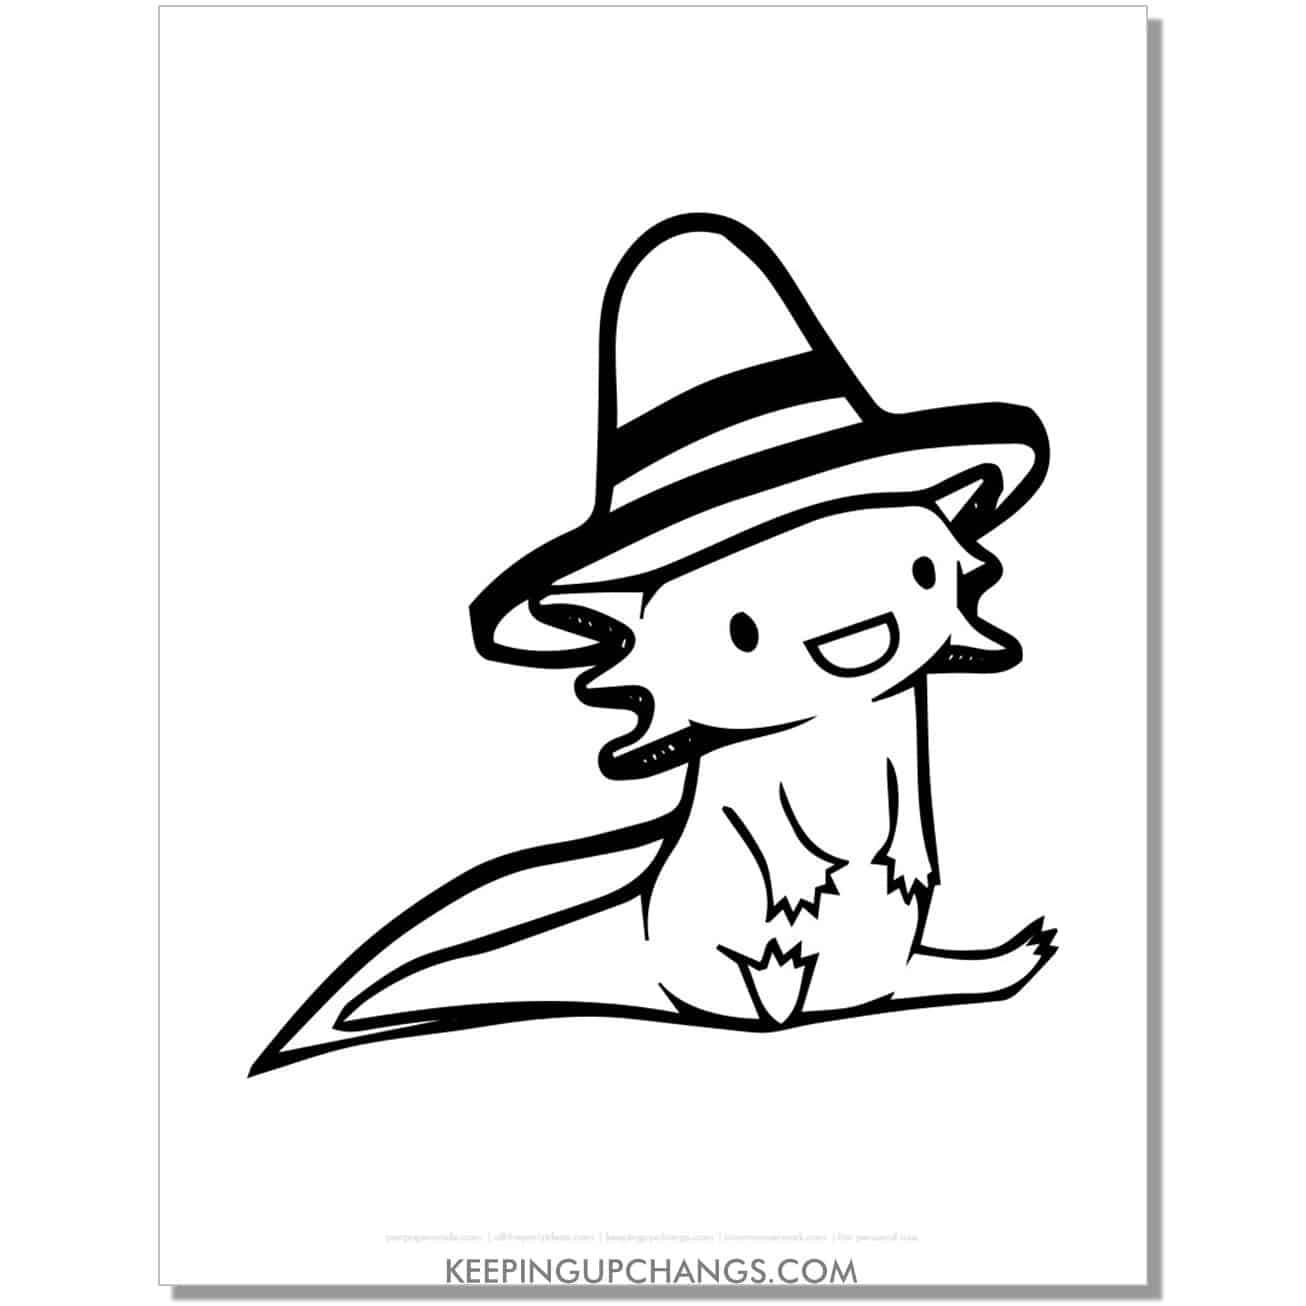 free adorable sitting axolotl in hat illustration coloring page.